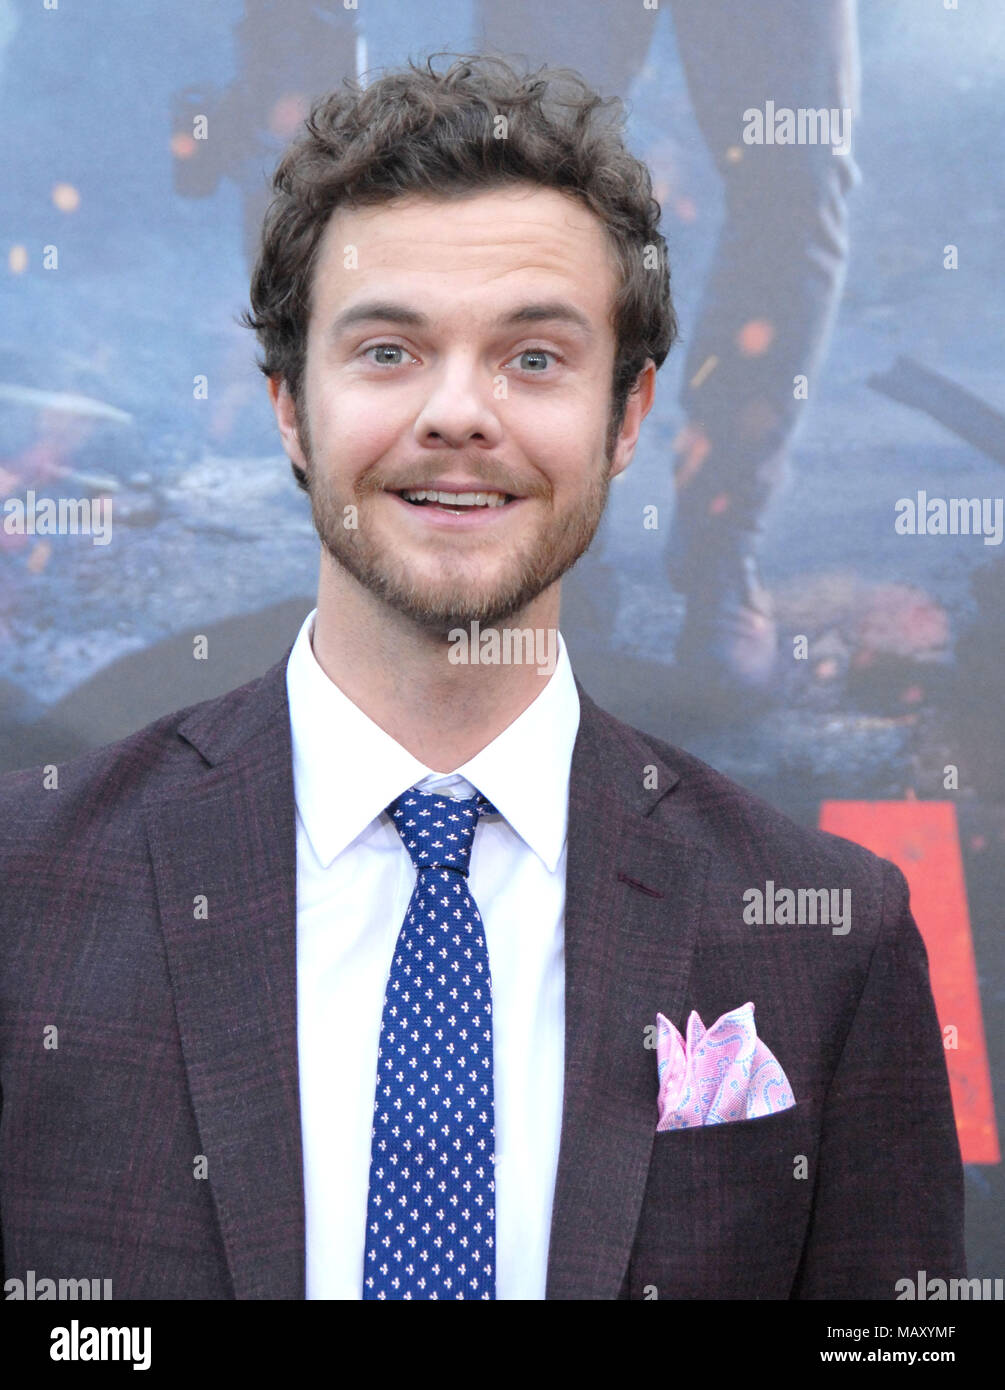 LOS ANGELES, CA - APRIL 04: Actor Jack Quaid attends the premiere of Warner Bros. Pictures' 'Rampage' at Microsoft Theater on April 4, 2018 in Los Angeles, California. Photo by Barry King/Alamy Live News Stock Photo